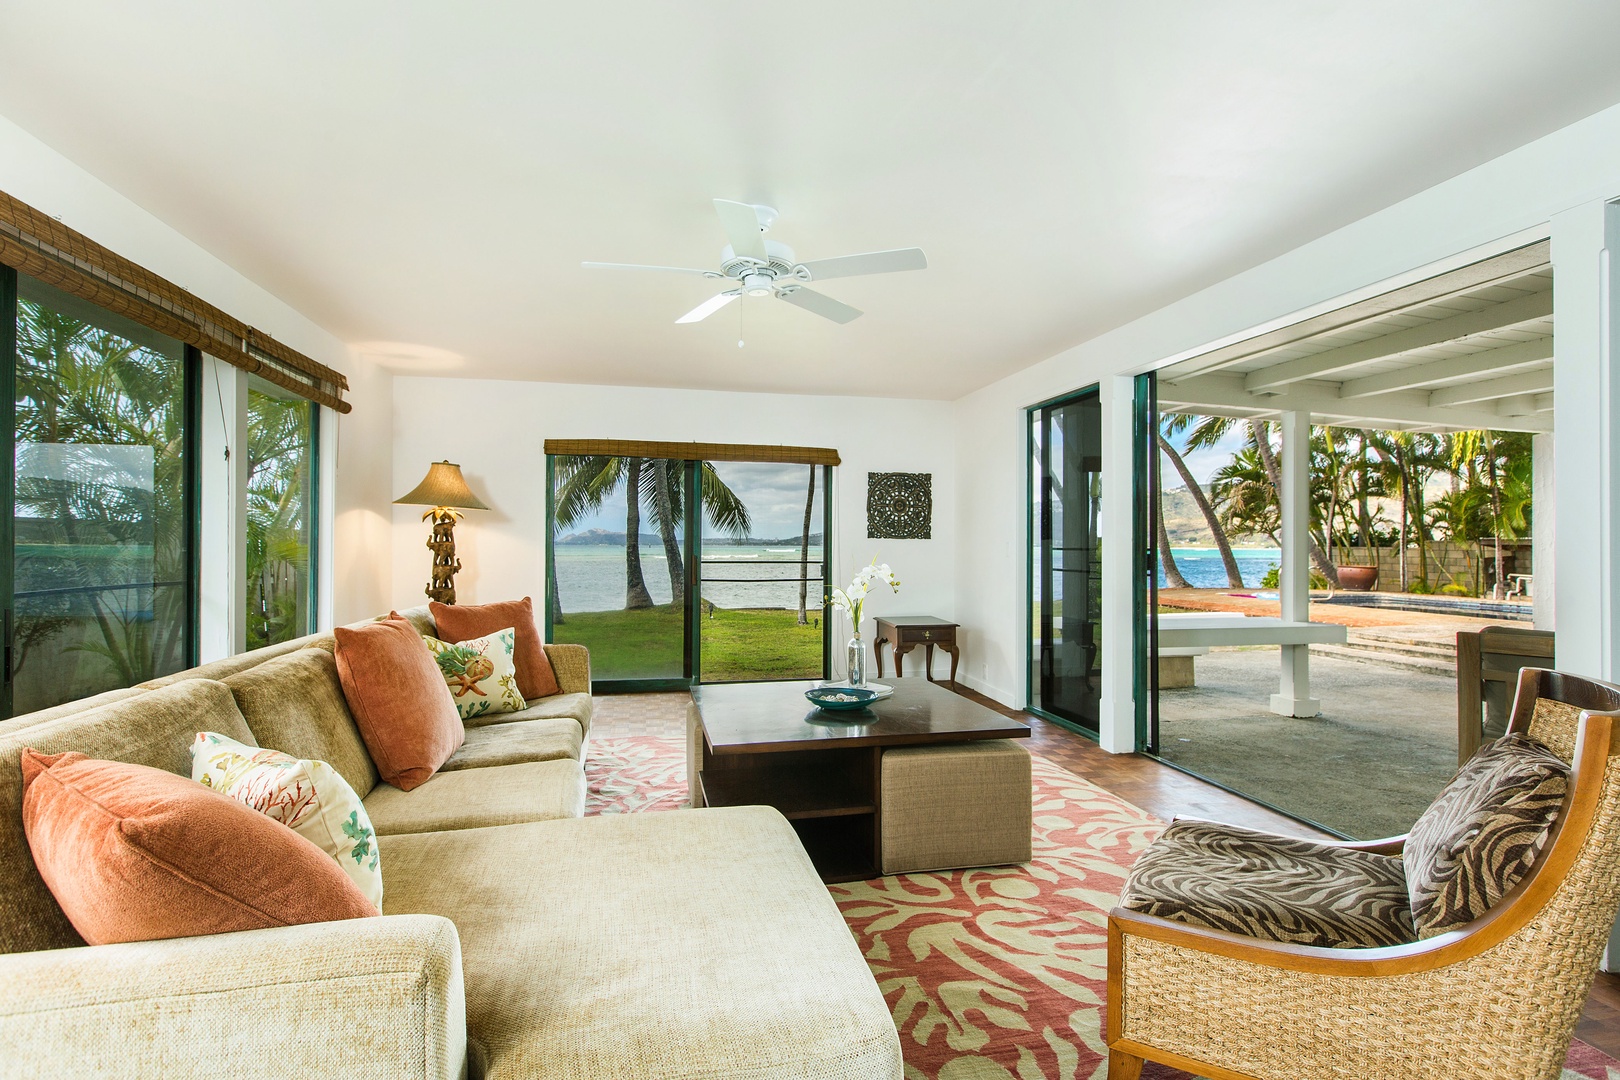 Honolulu Vacation Rentals, Hale Kai - Recline and take in the breeze in the sitting room.